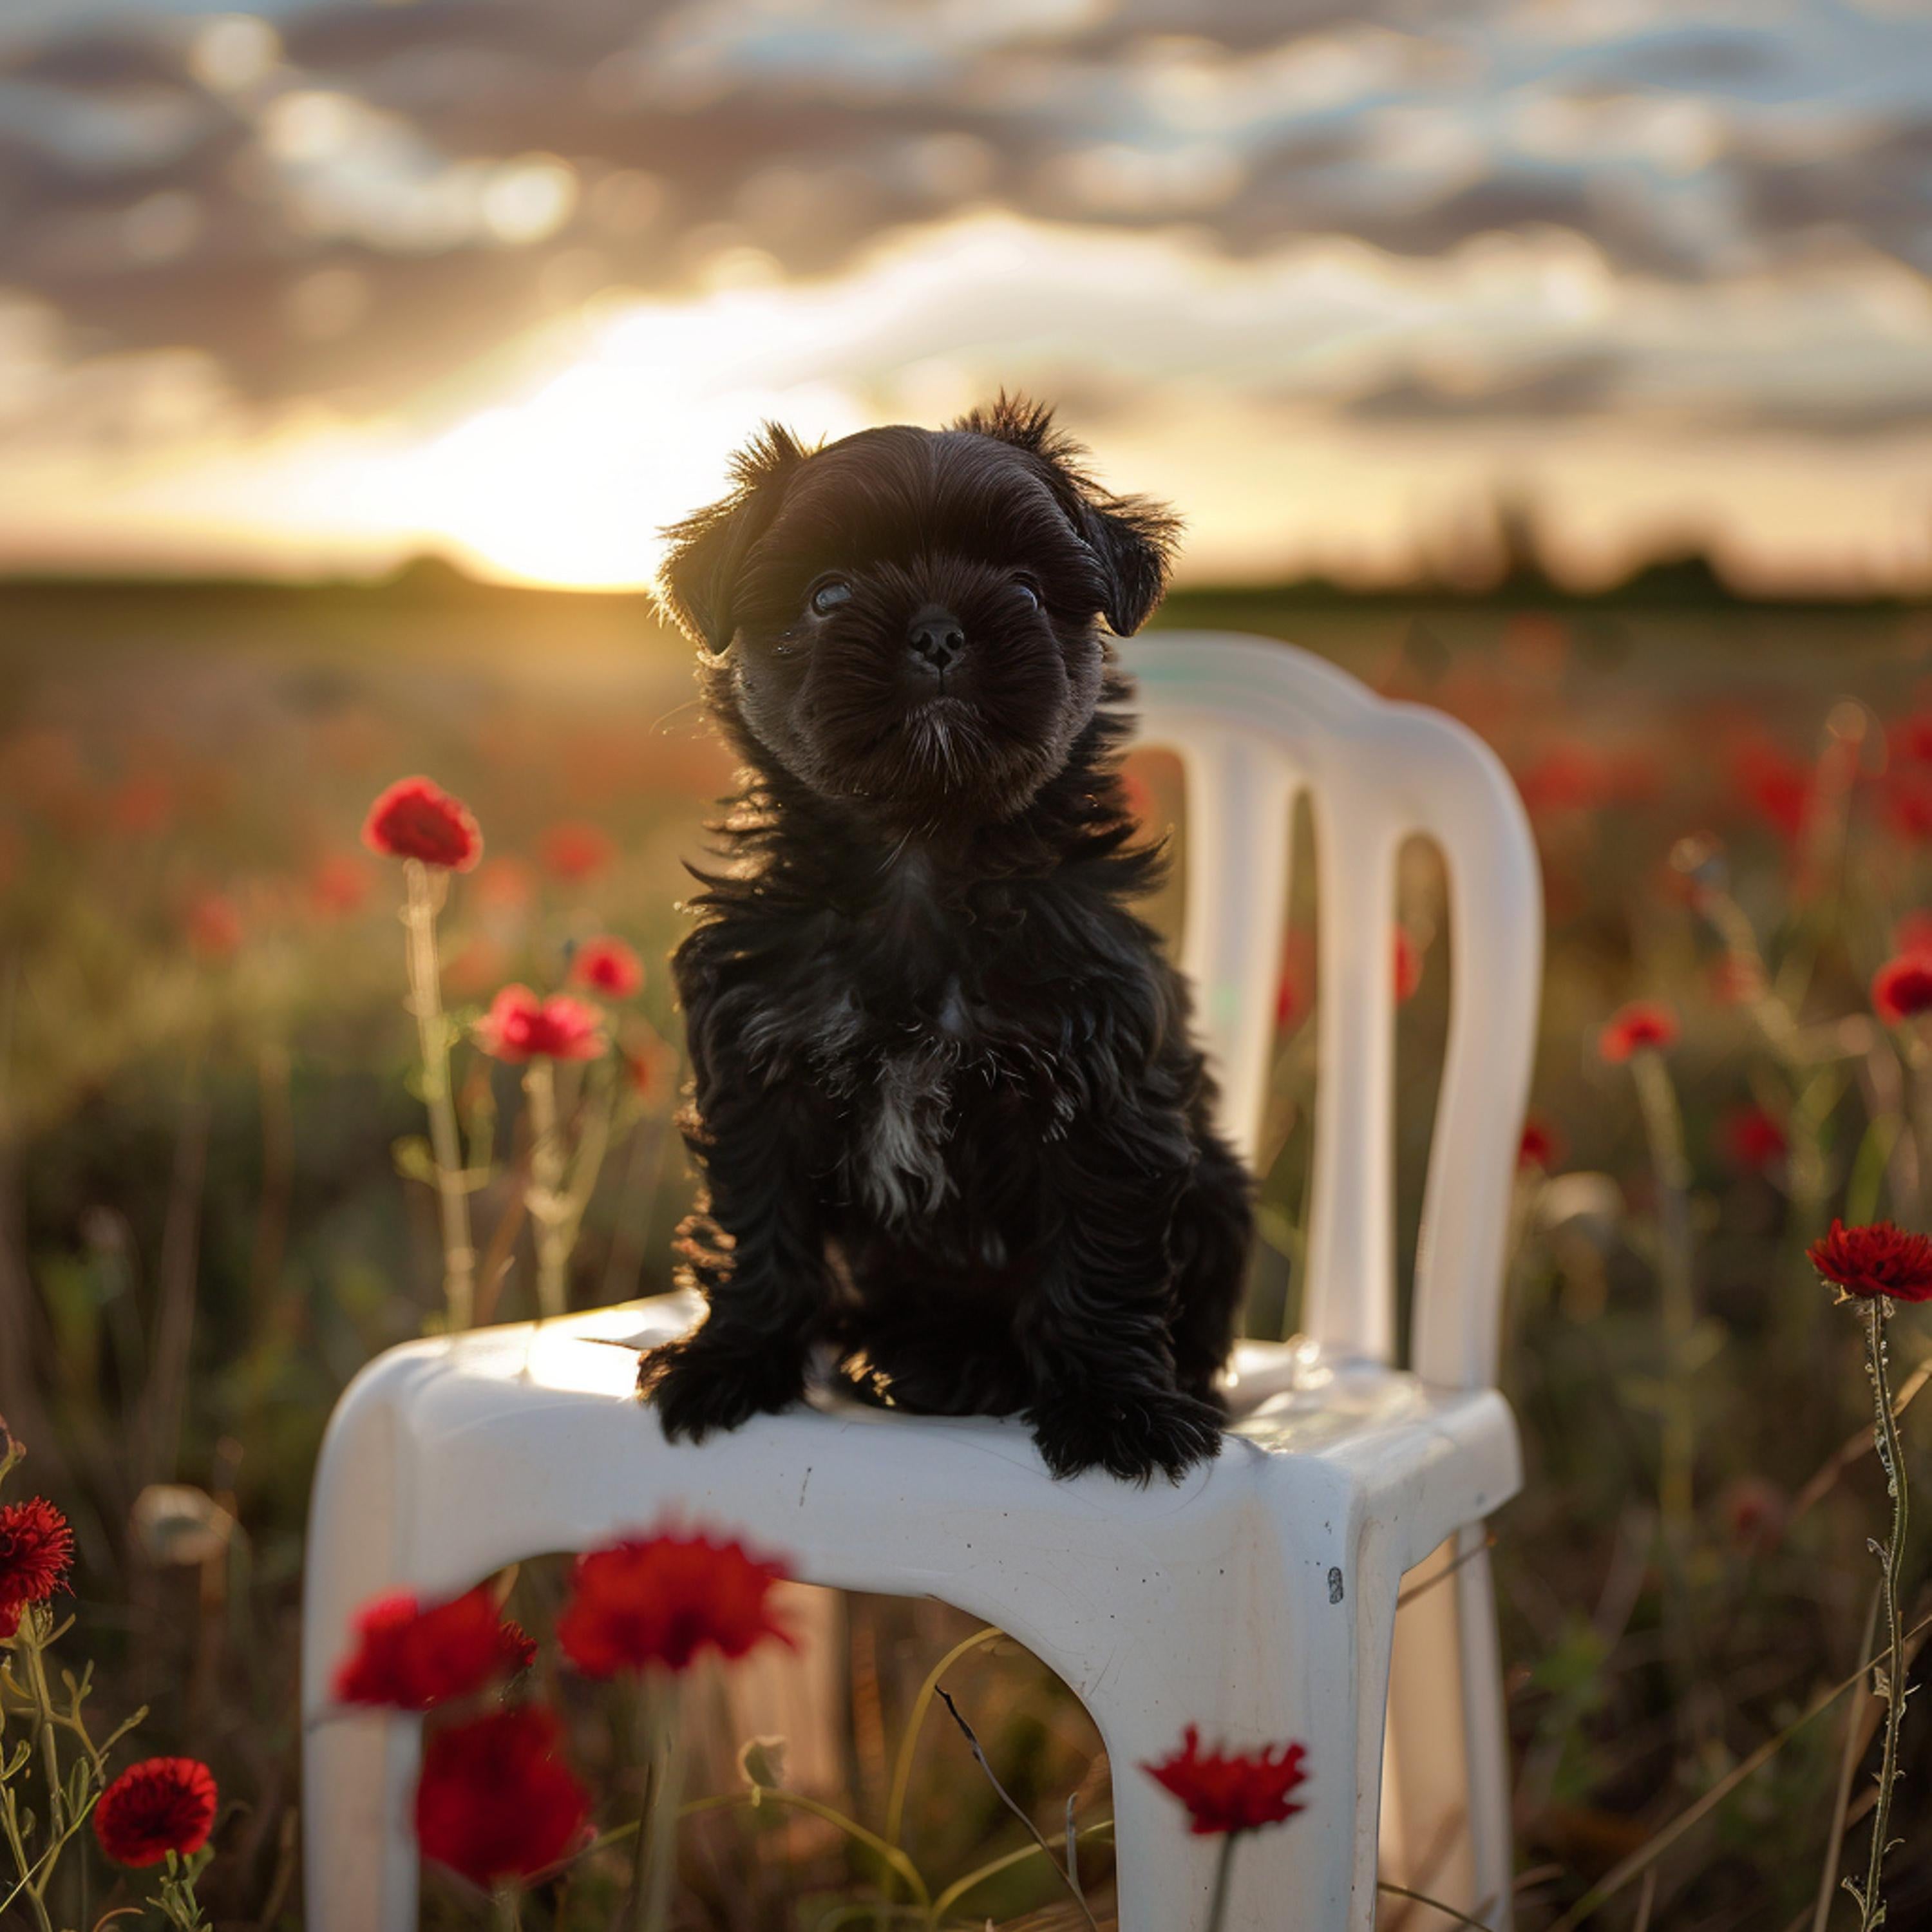 Chewbacca - Affenpinscher (Puppy, Dog, Portrait, Staged) - Photograph by Lord Fauntleroy